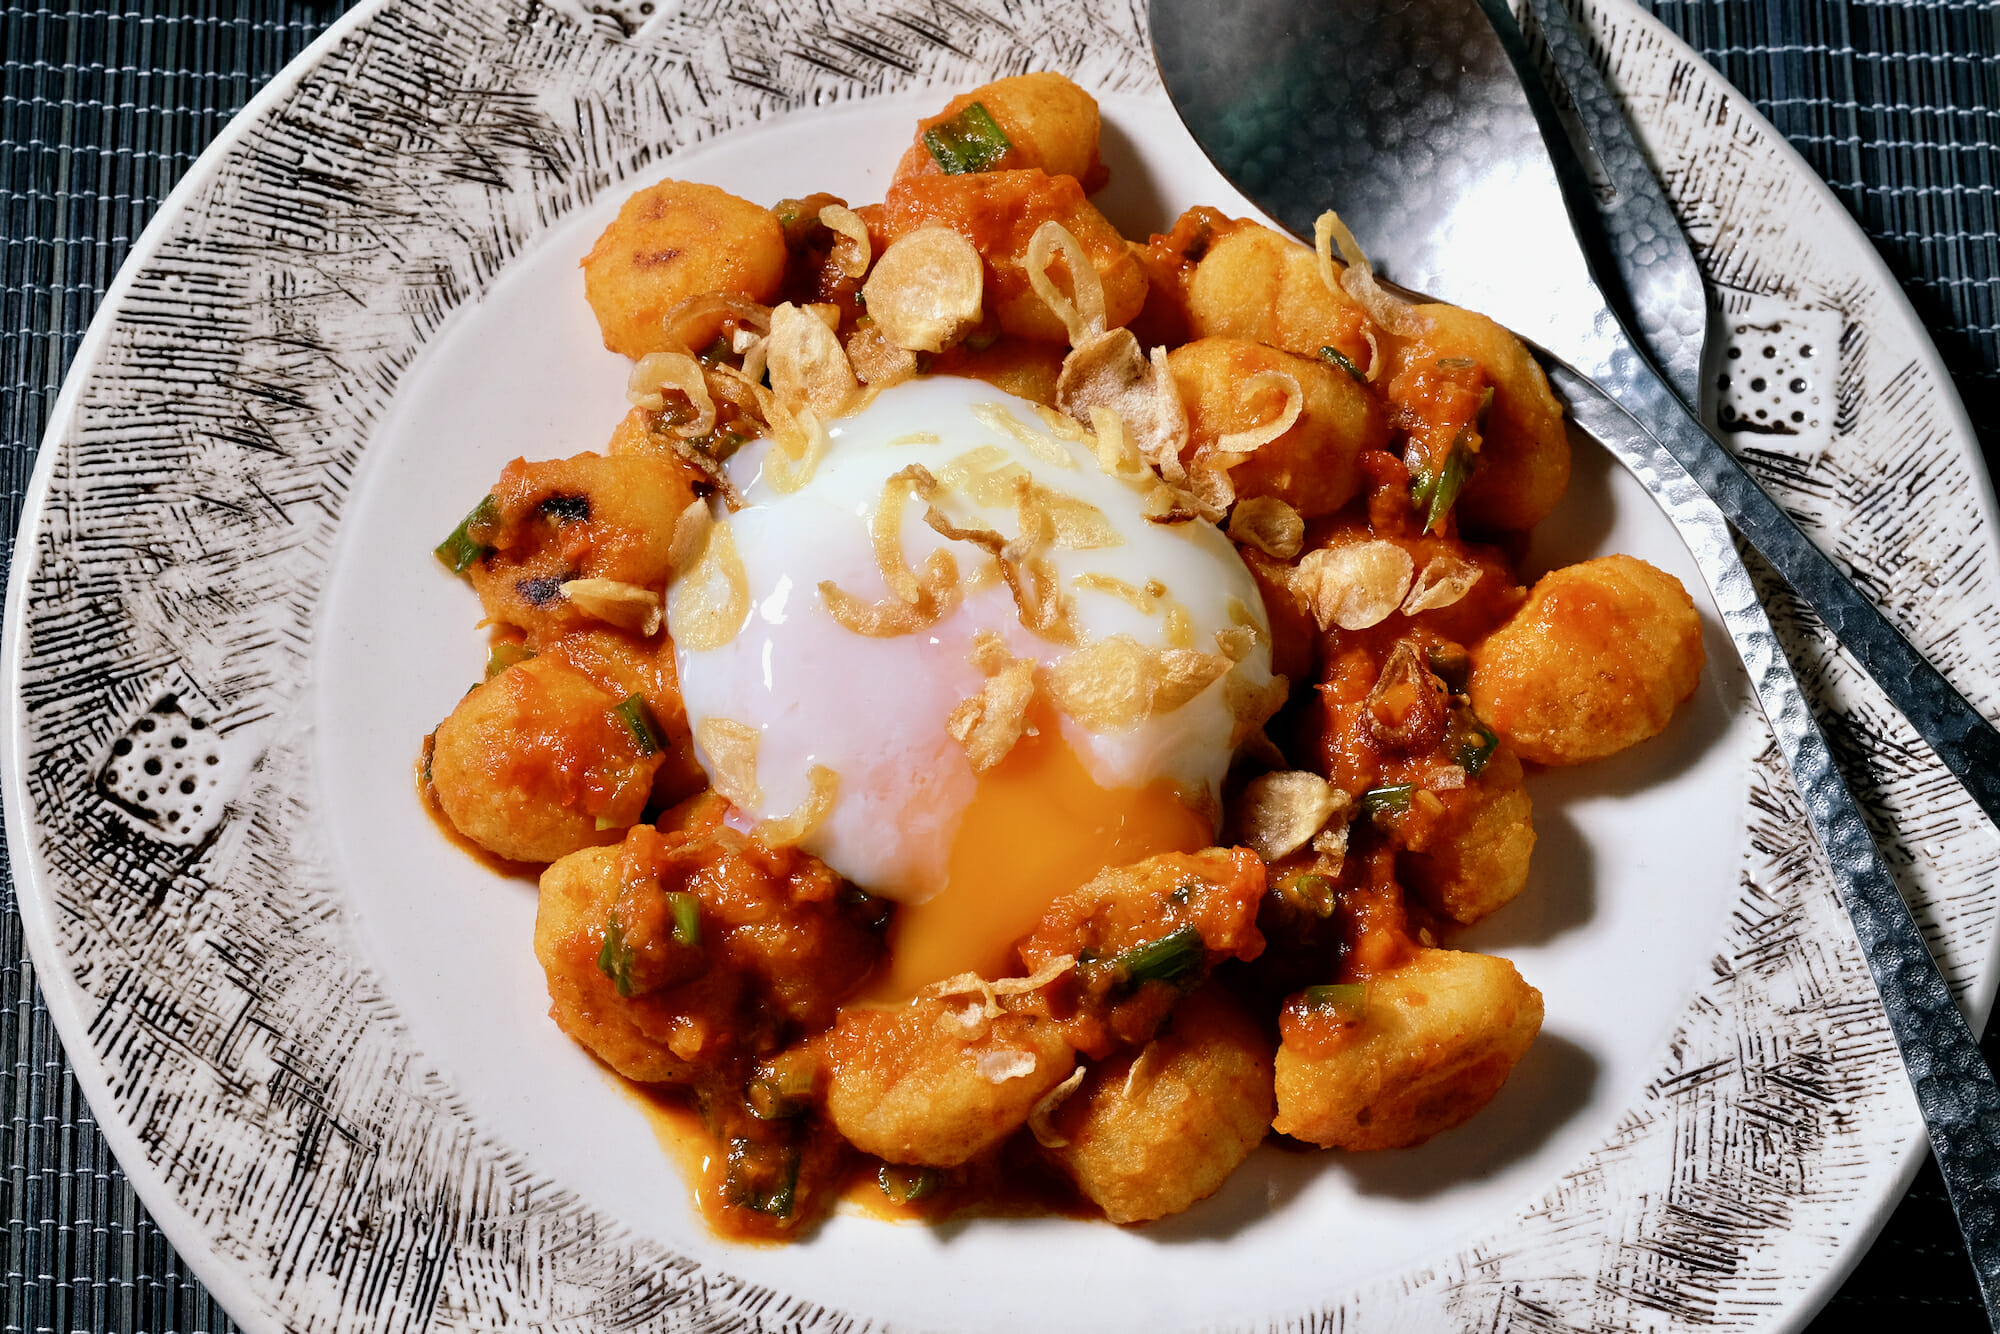 Pan Fried Gnocchi - The Twin Cooking Project by Sheenam & Muskaan